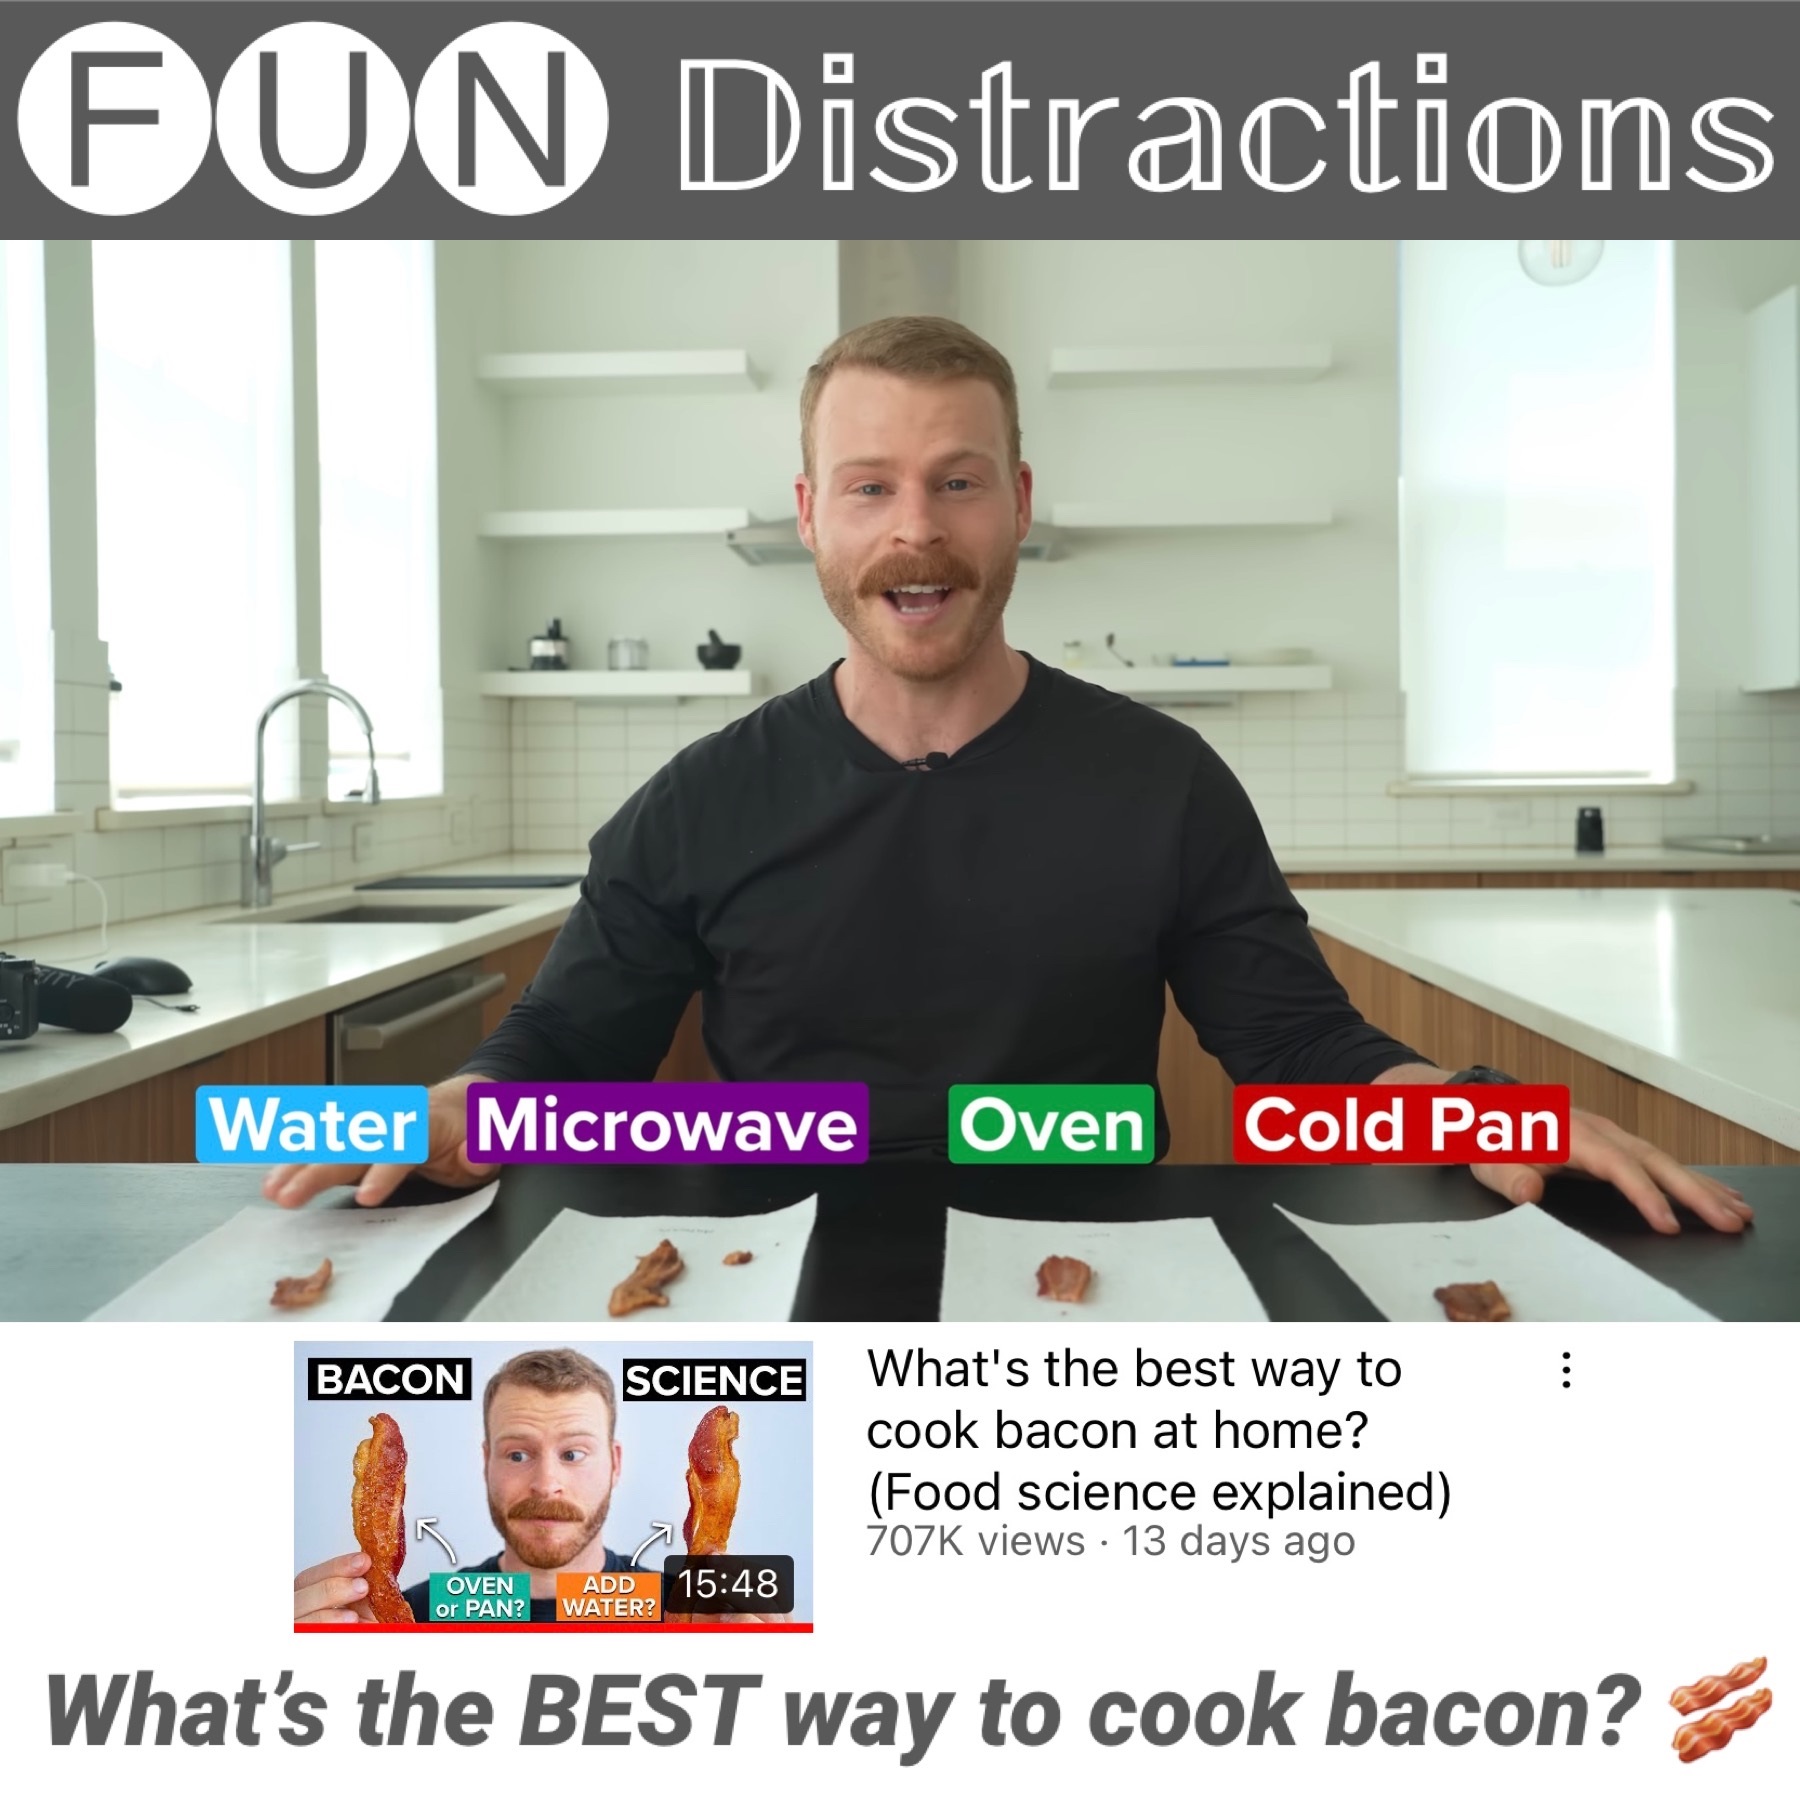 Image asking what's the best way to cook bacon.